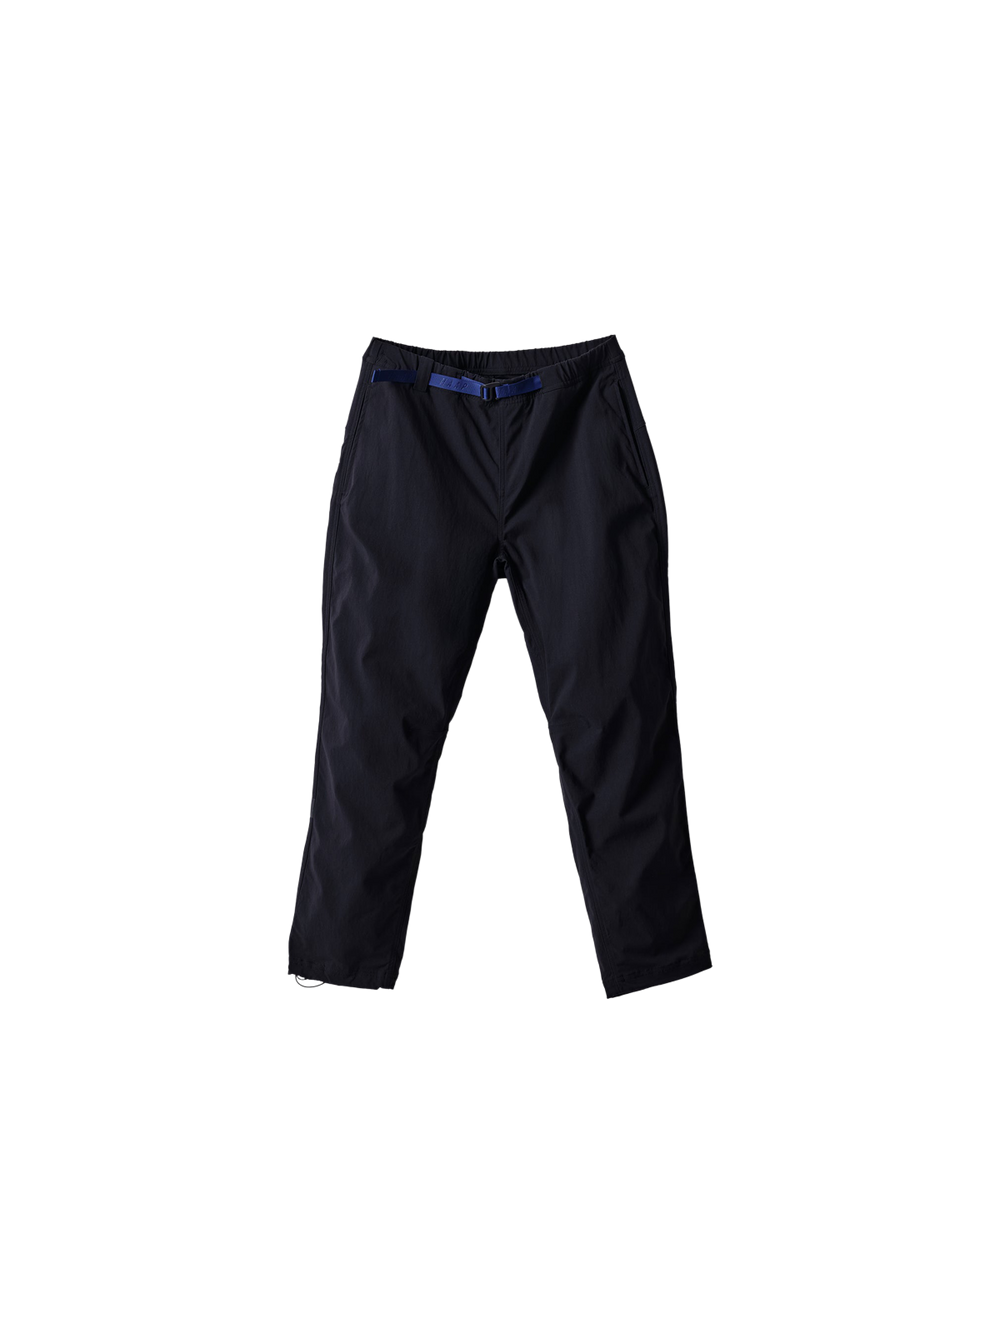 Product Image for Phase Pant